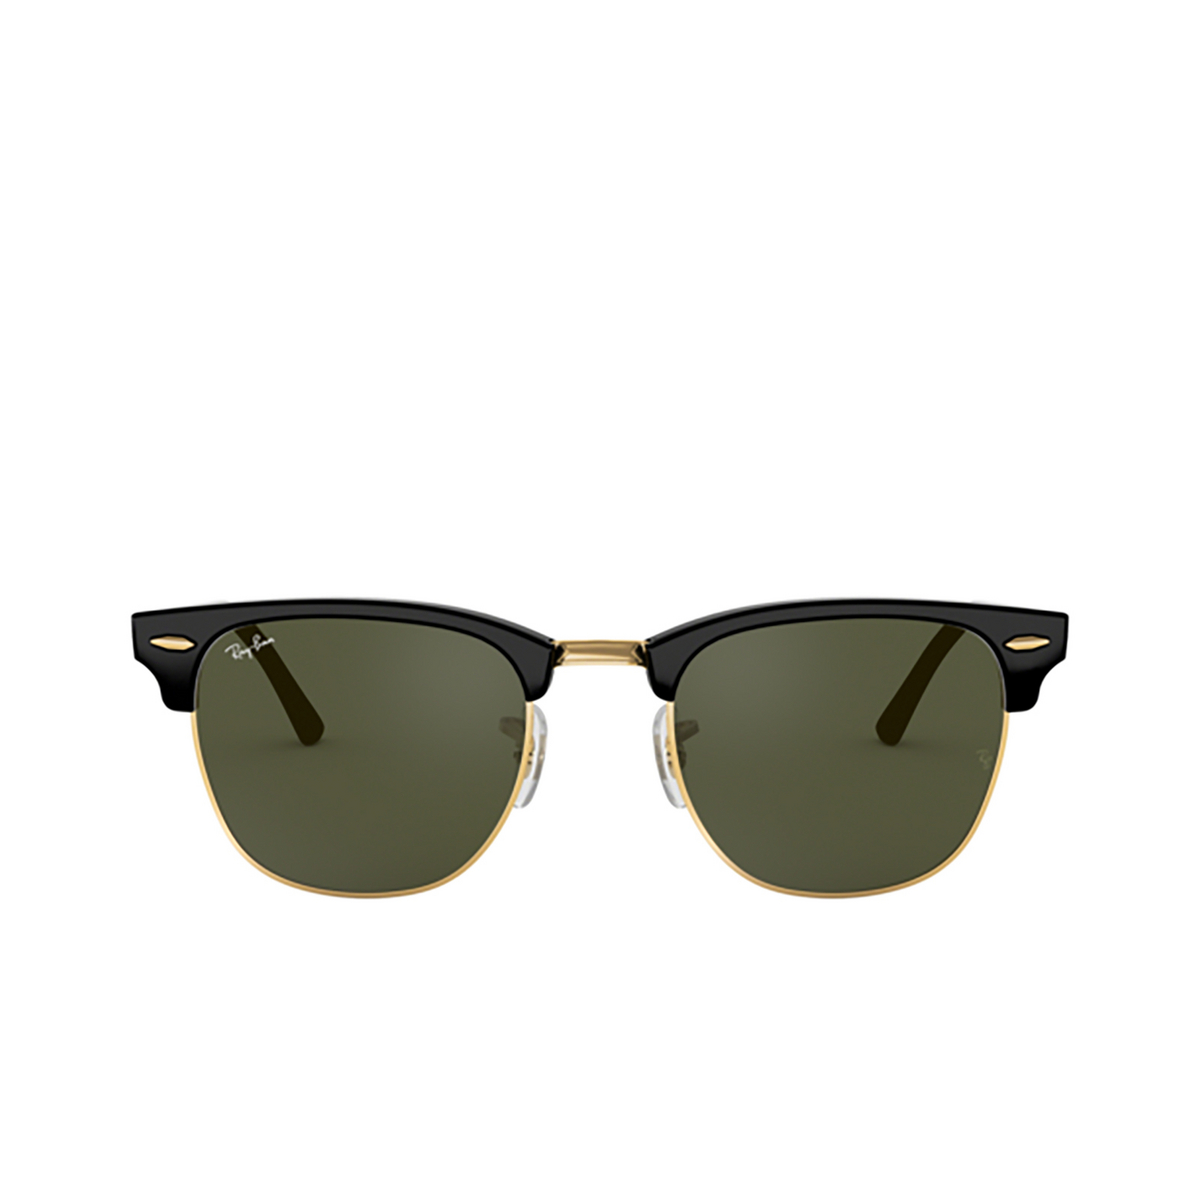 Ray-Ban® Sunglasses: Clubmaster RB3016 color Black On Arista W0365 - front view.